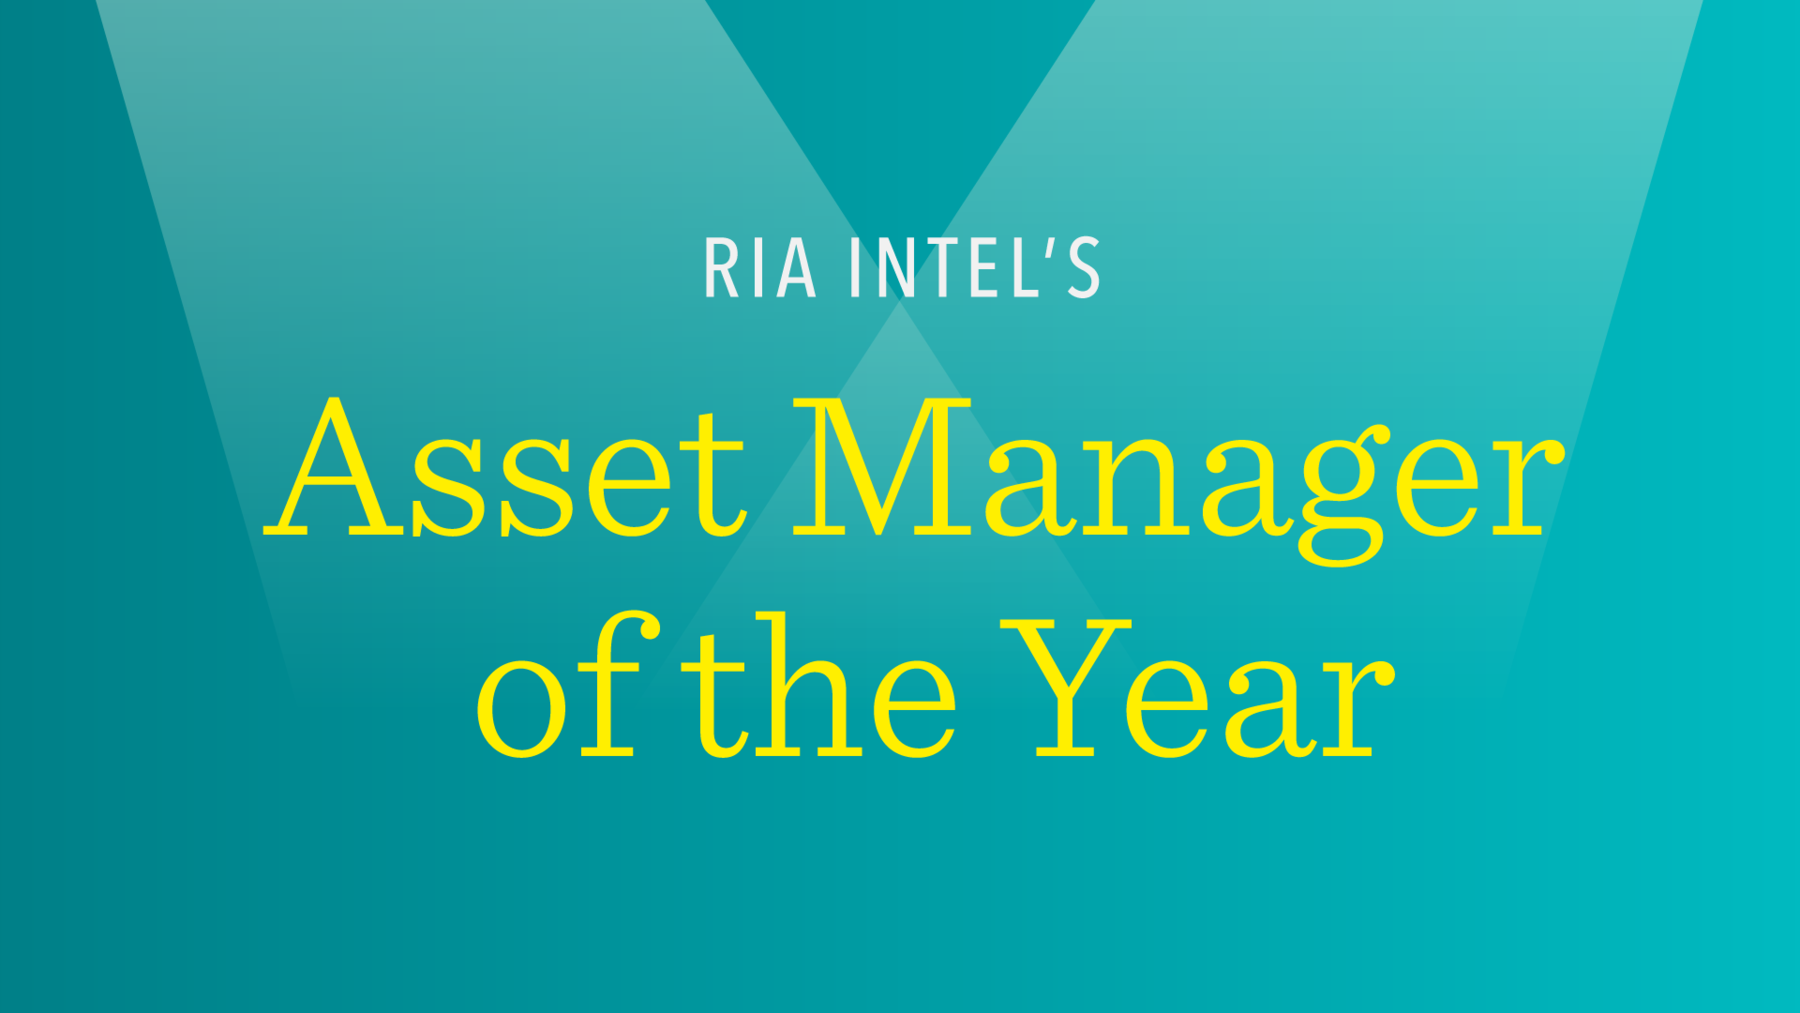 Dimensional Named ‘Asset Manager of the Year’ for 2022 by RIA Intel